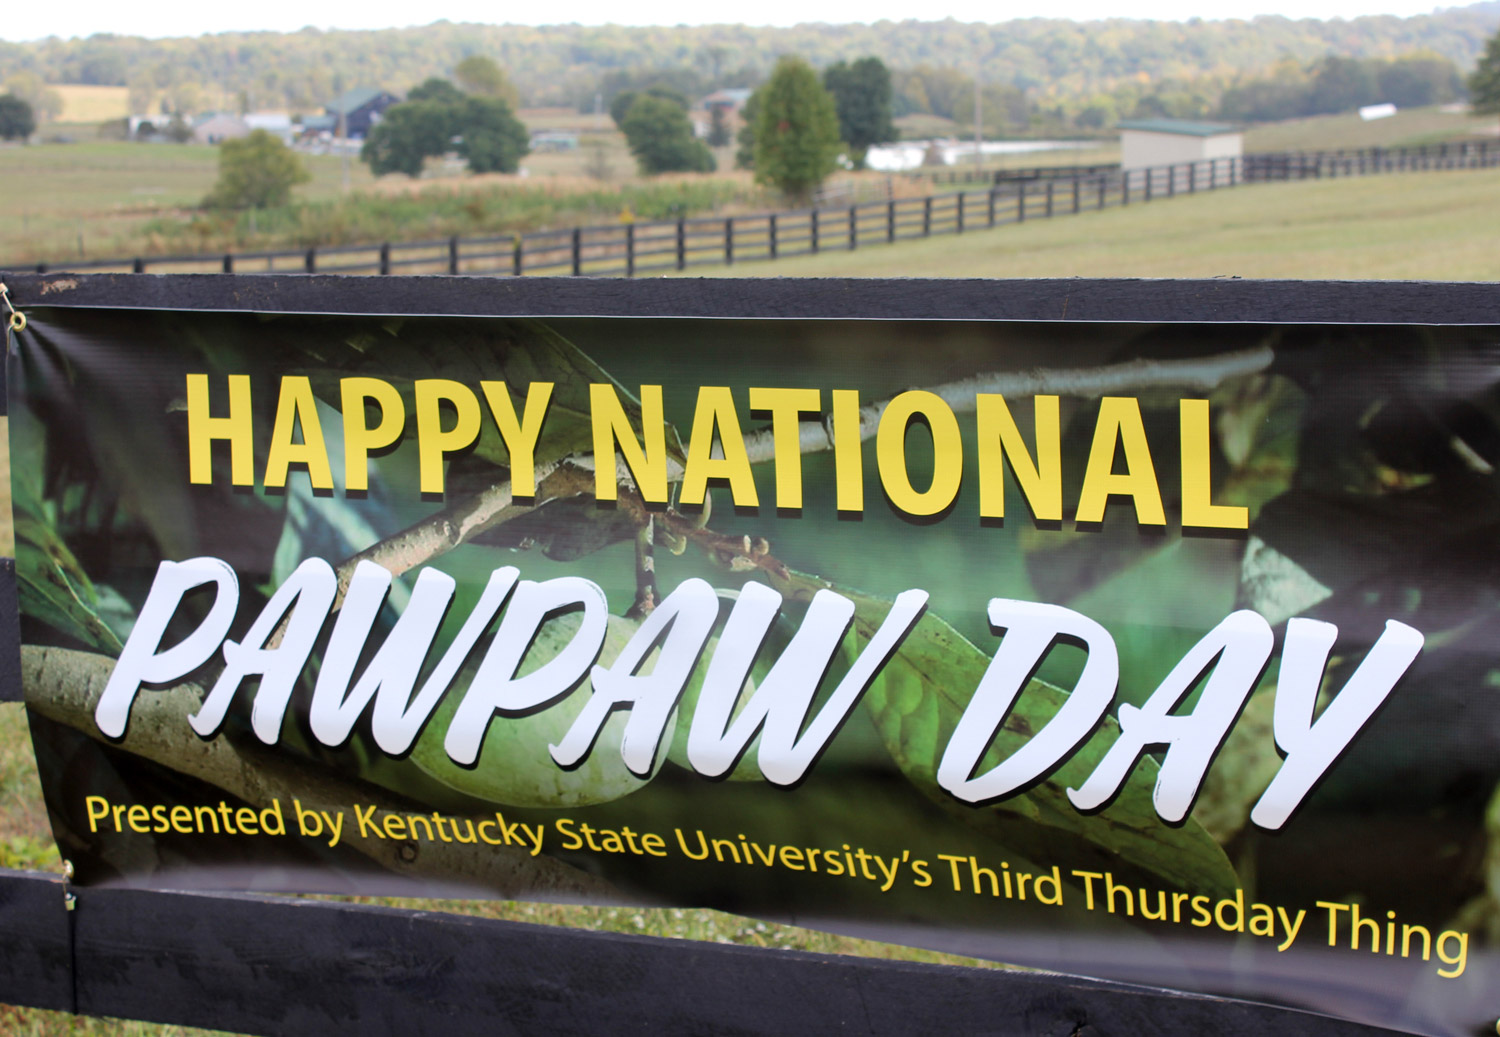 Banner on horse fence proclaiming National Pawpaw Day at KY State University in Frankfort